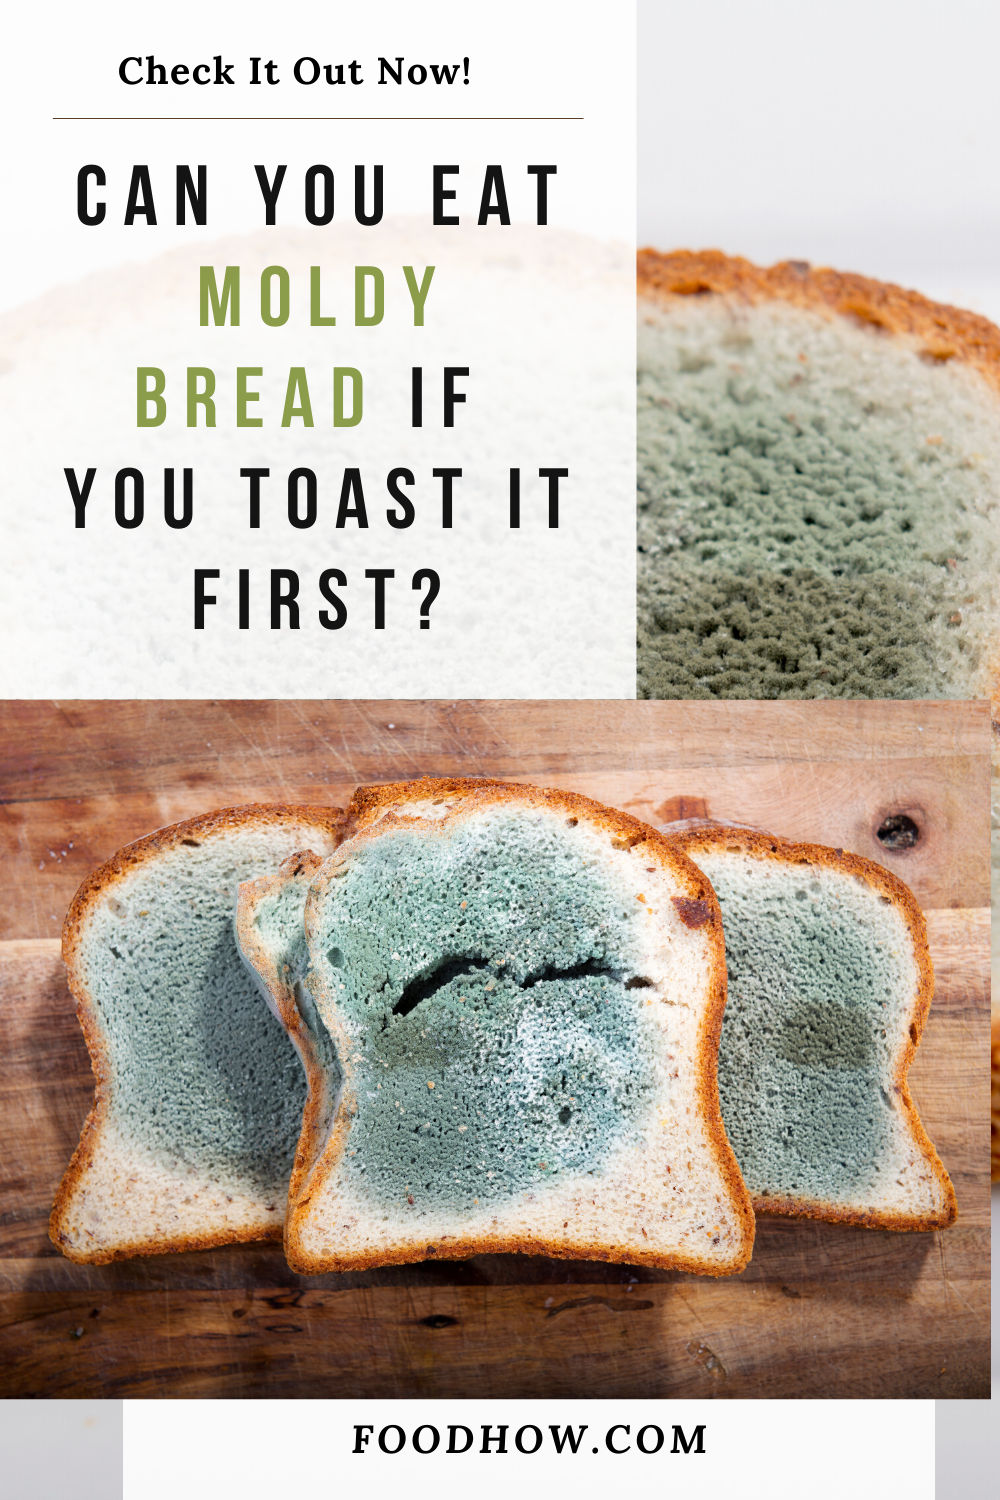 How Soon Do I Get Sick After Eating A Moldy Bread? This ...